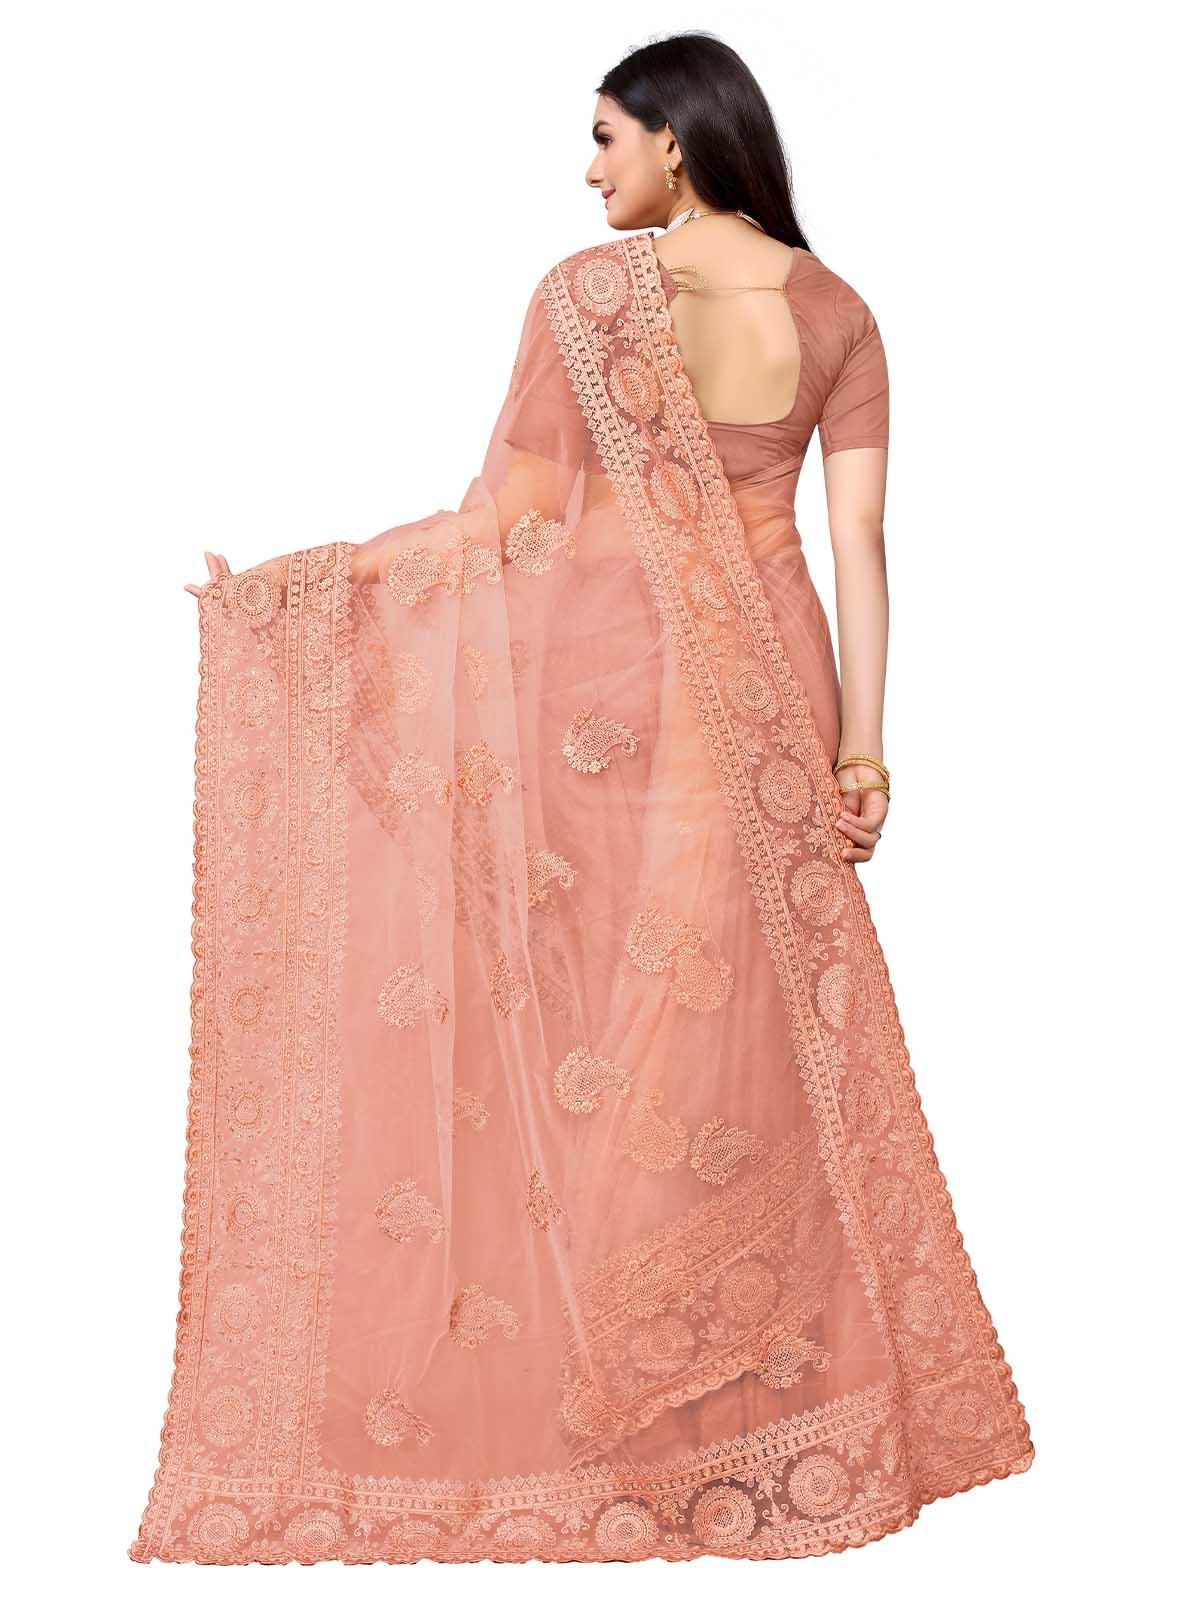 Women's Peach Net Embroidered Saree With Blouse - Odette